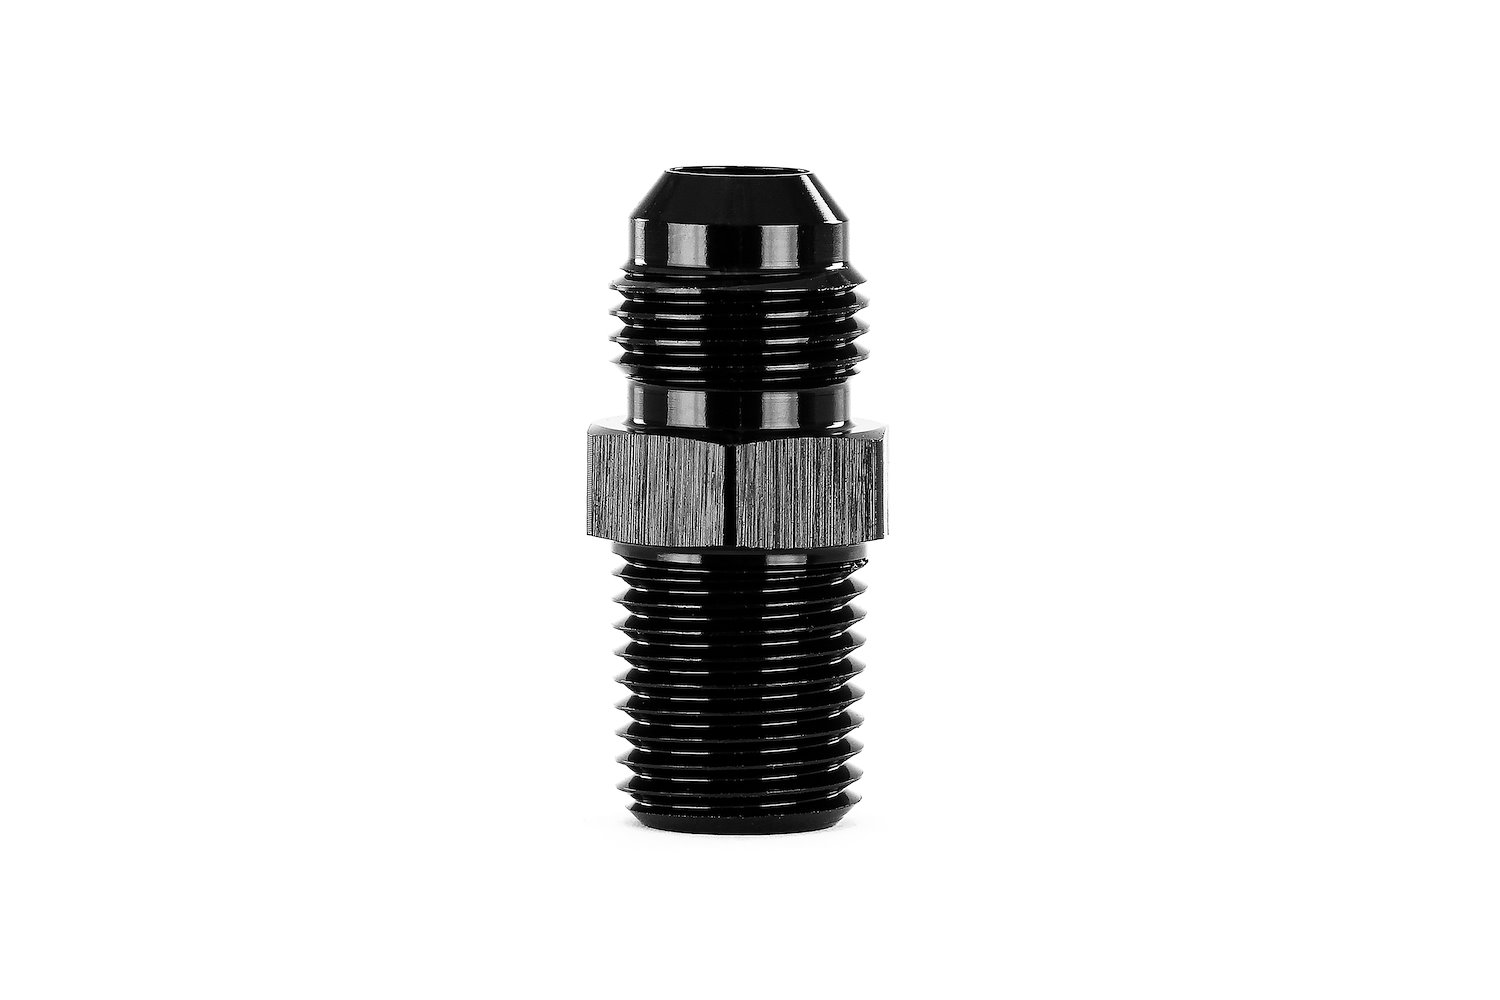 AN8166 AN Flare to NPT Straight Adapter, Convert from NPT Pipe Thread To An Flare